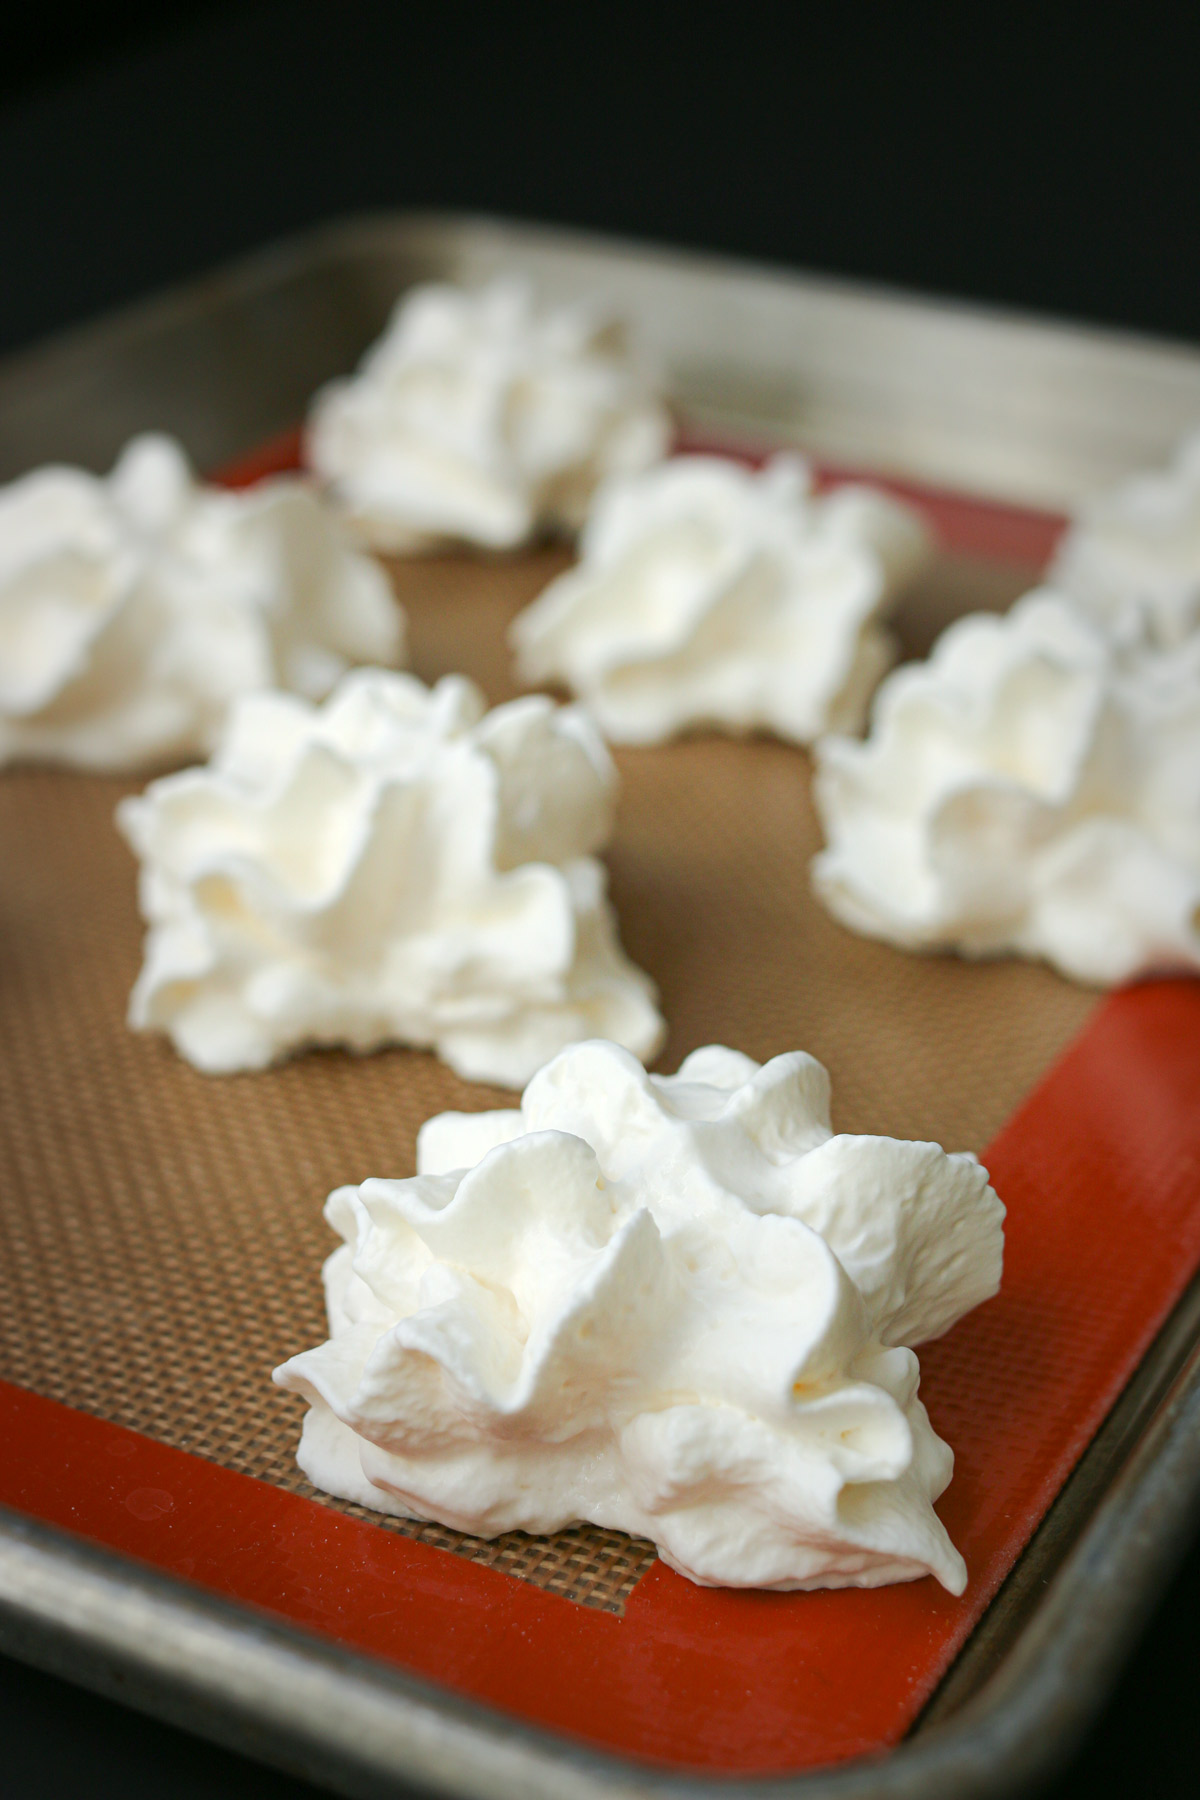 dollops of whipped cream in an array on a silicone mat in a baking sheet.